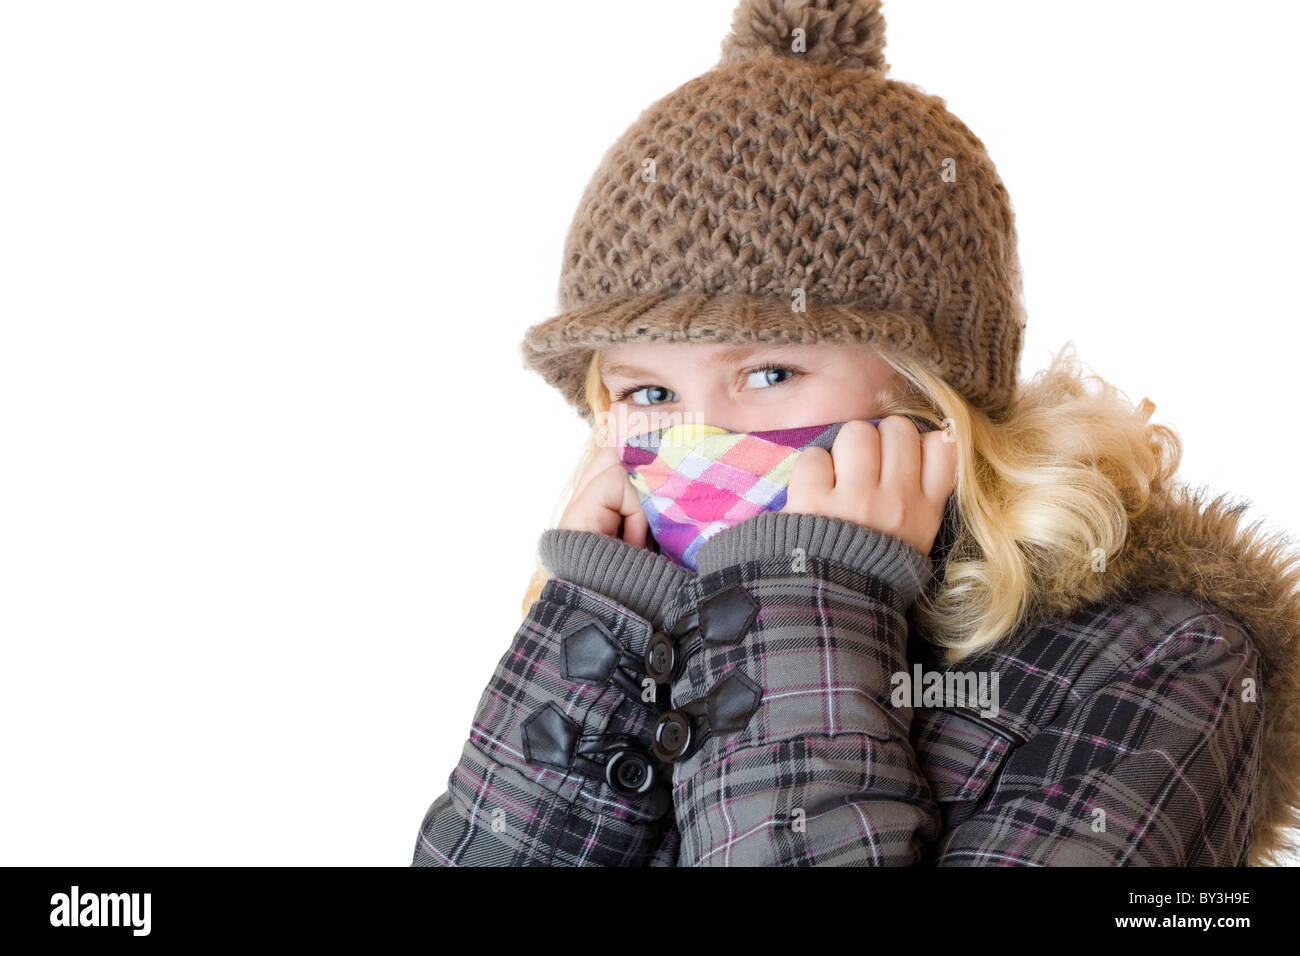 Young happy girl with cap, scarf and jacket. Isolated on white background. Stock Photo